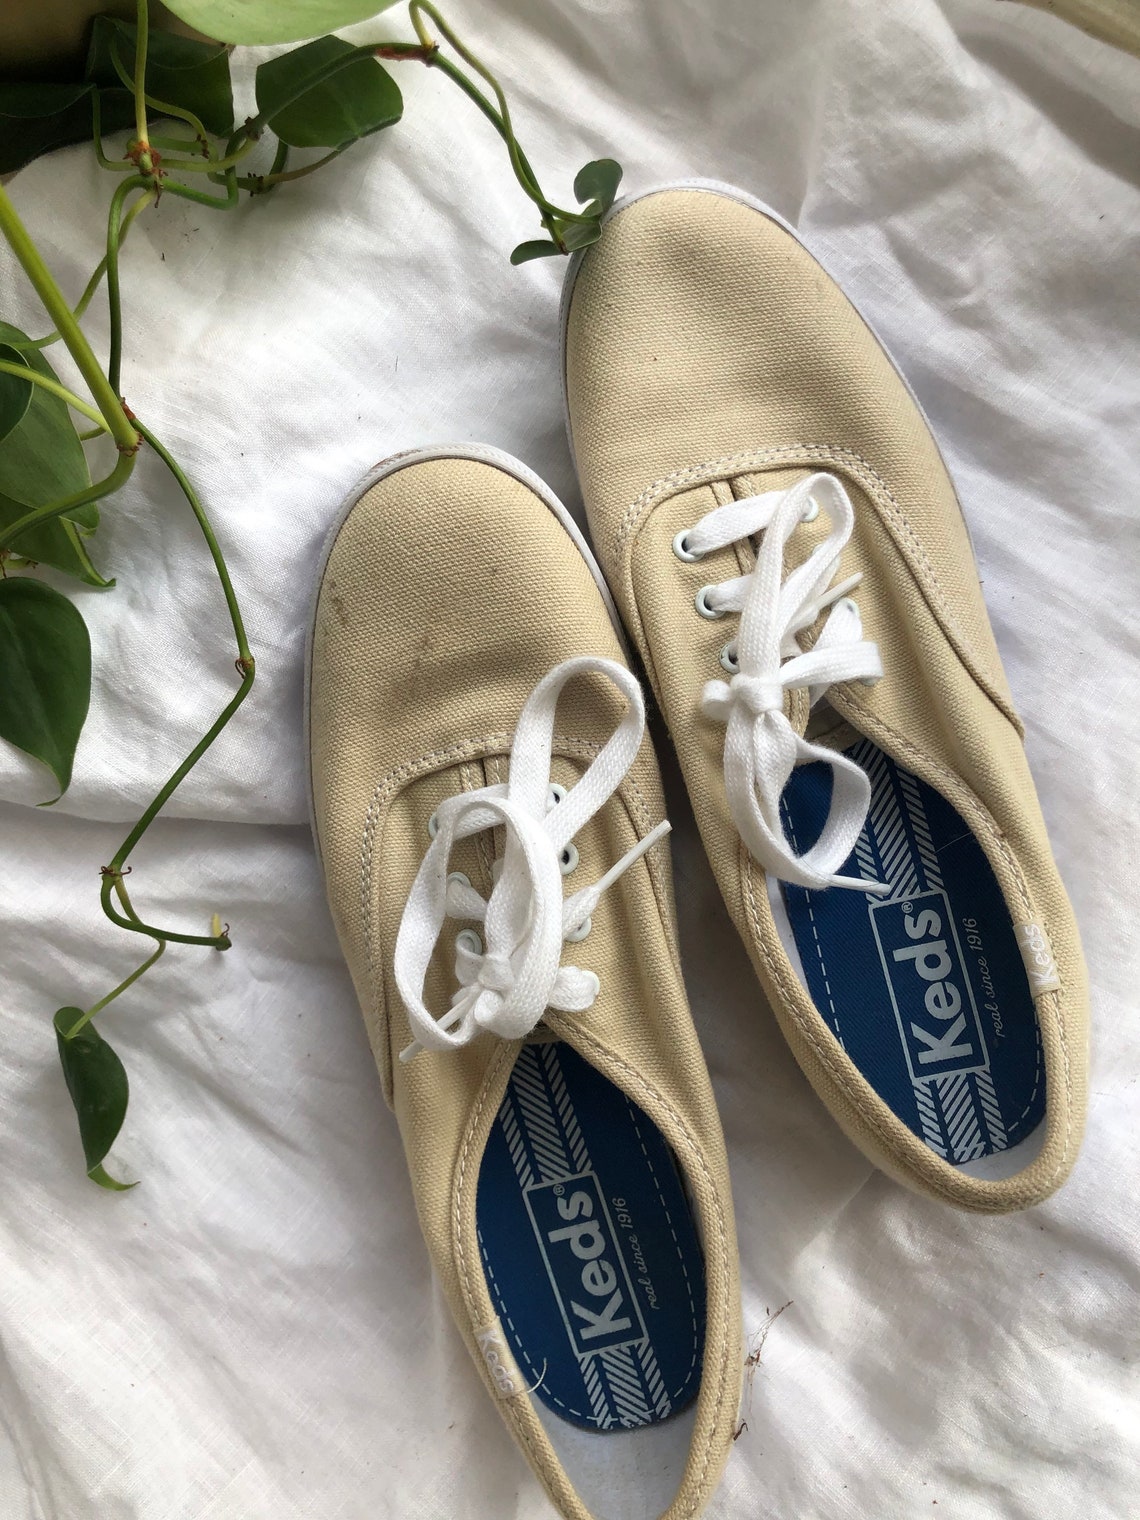 Vintage 1990s Keds Tennis Shoes Size 6.5 Beige Off White Like | Etsy